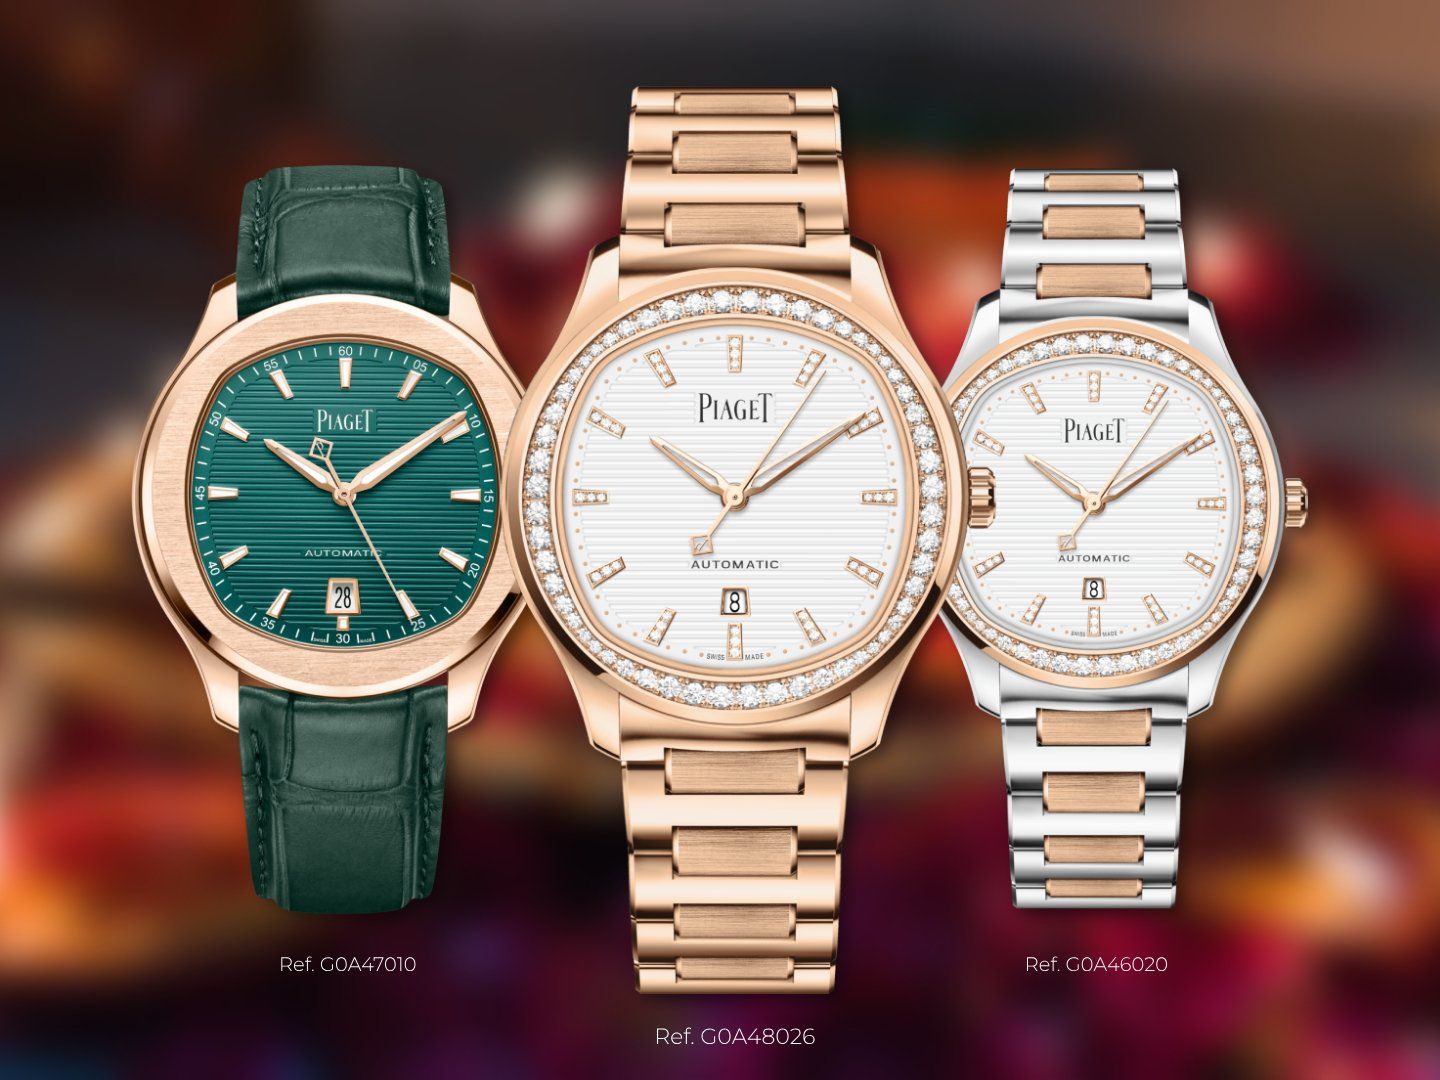 Top 5 Gold Watches To Glam Up The Festive Season